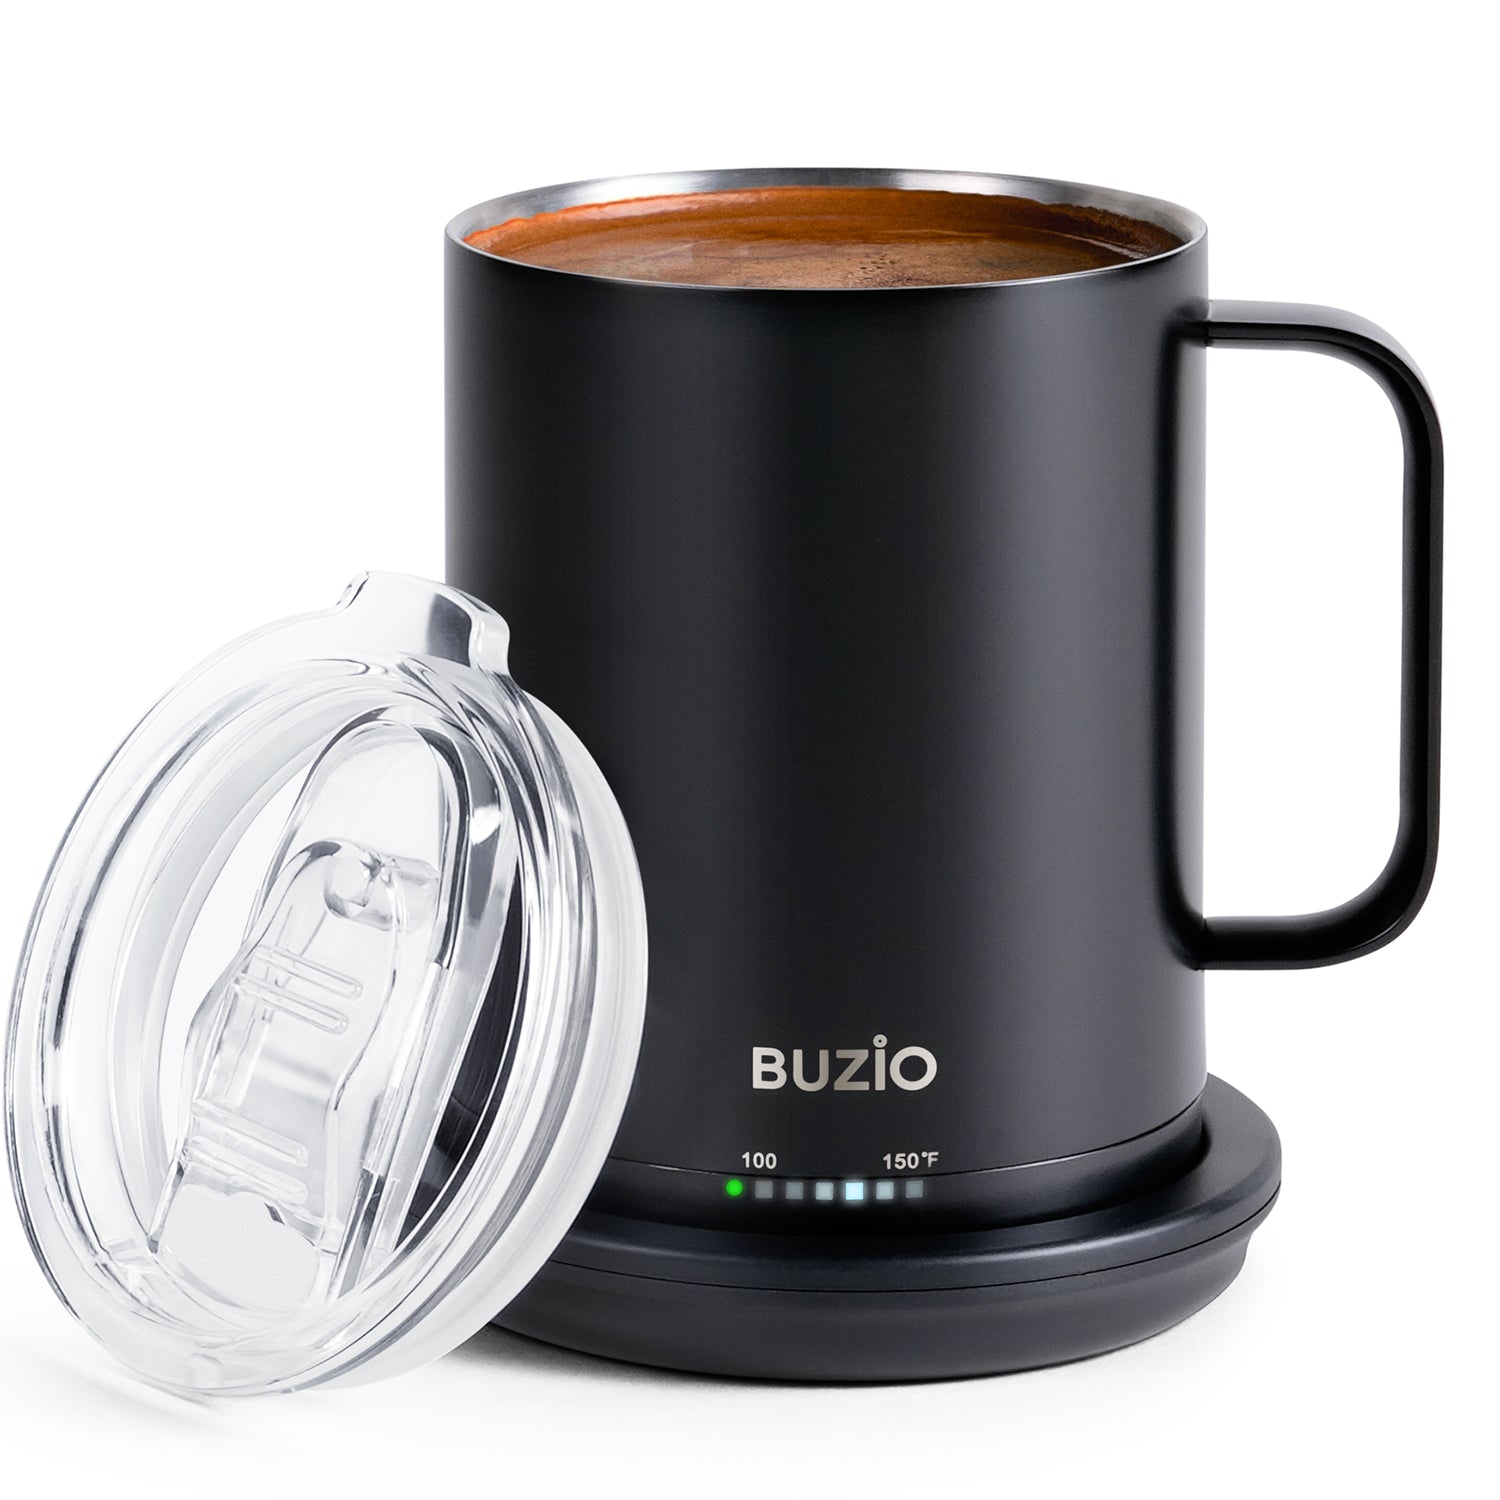 Smart Coffee Mug Warmer With 3 Temperature Settings, Perfect For